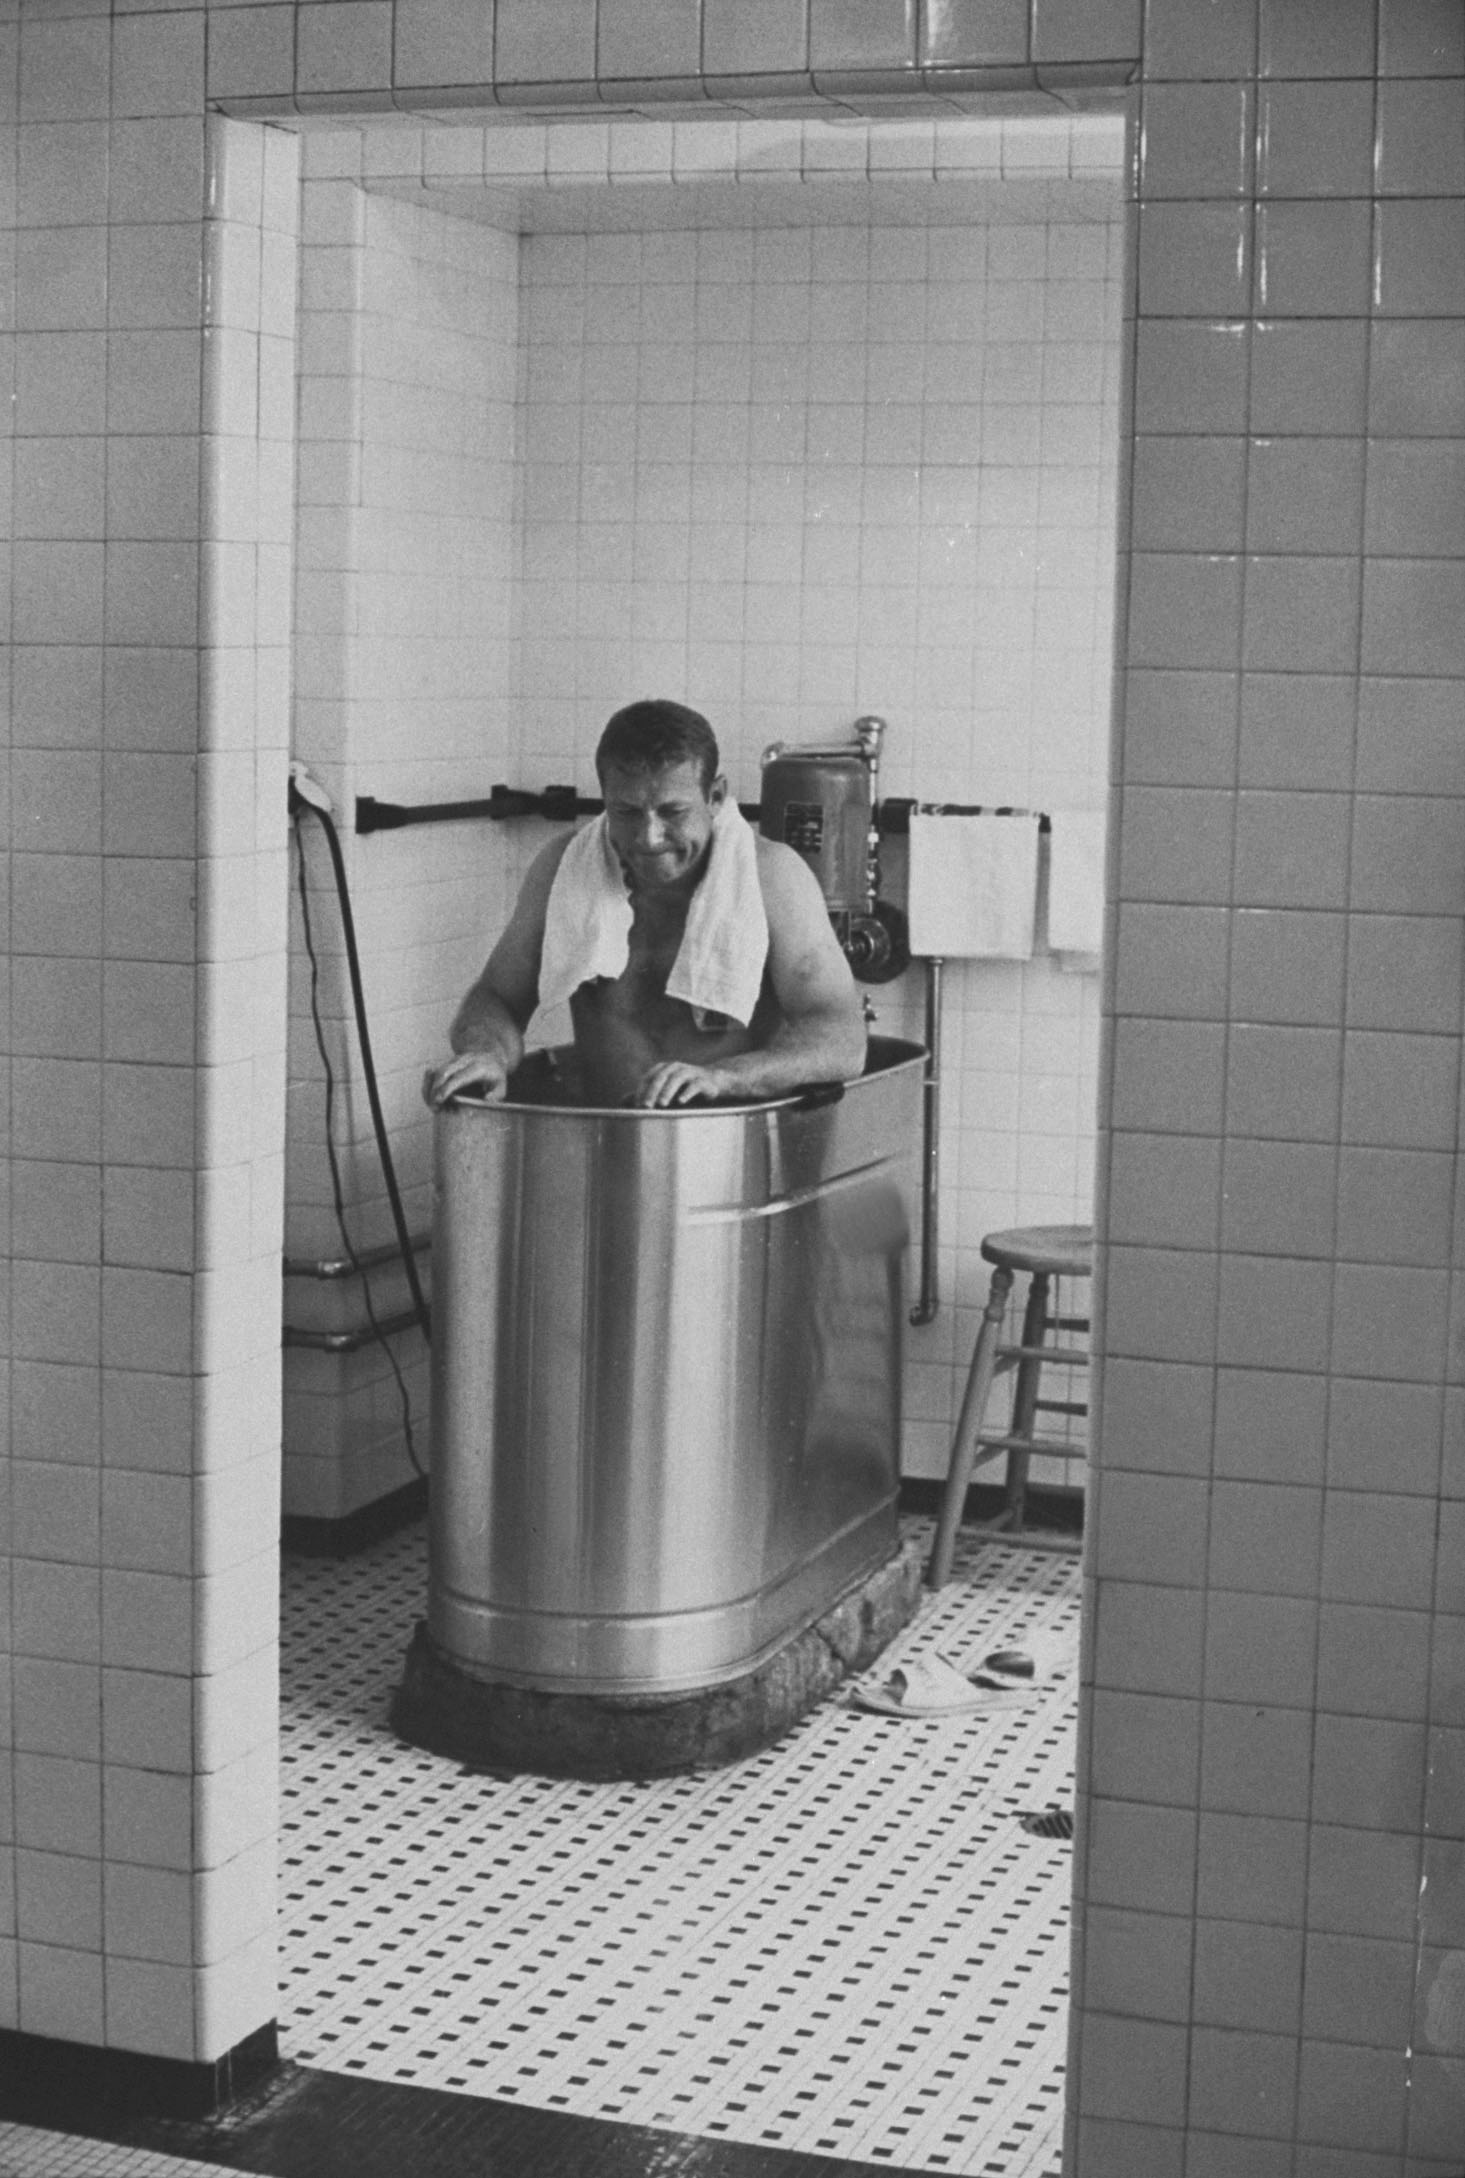 Mickey Mantle soaking in whirlpool bathtub after game, 1964.